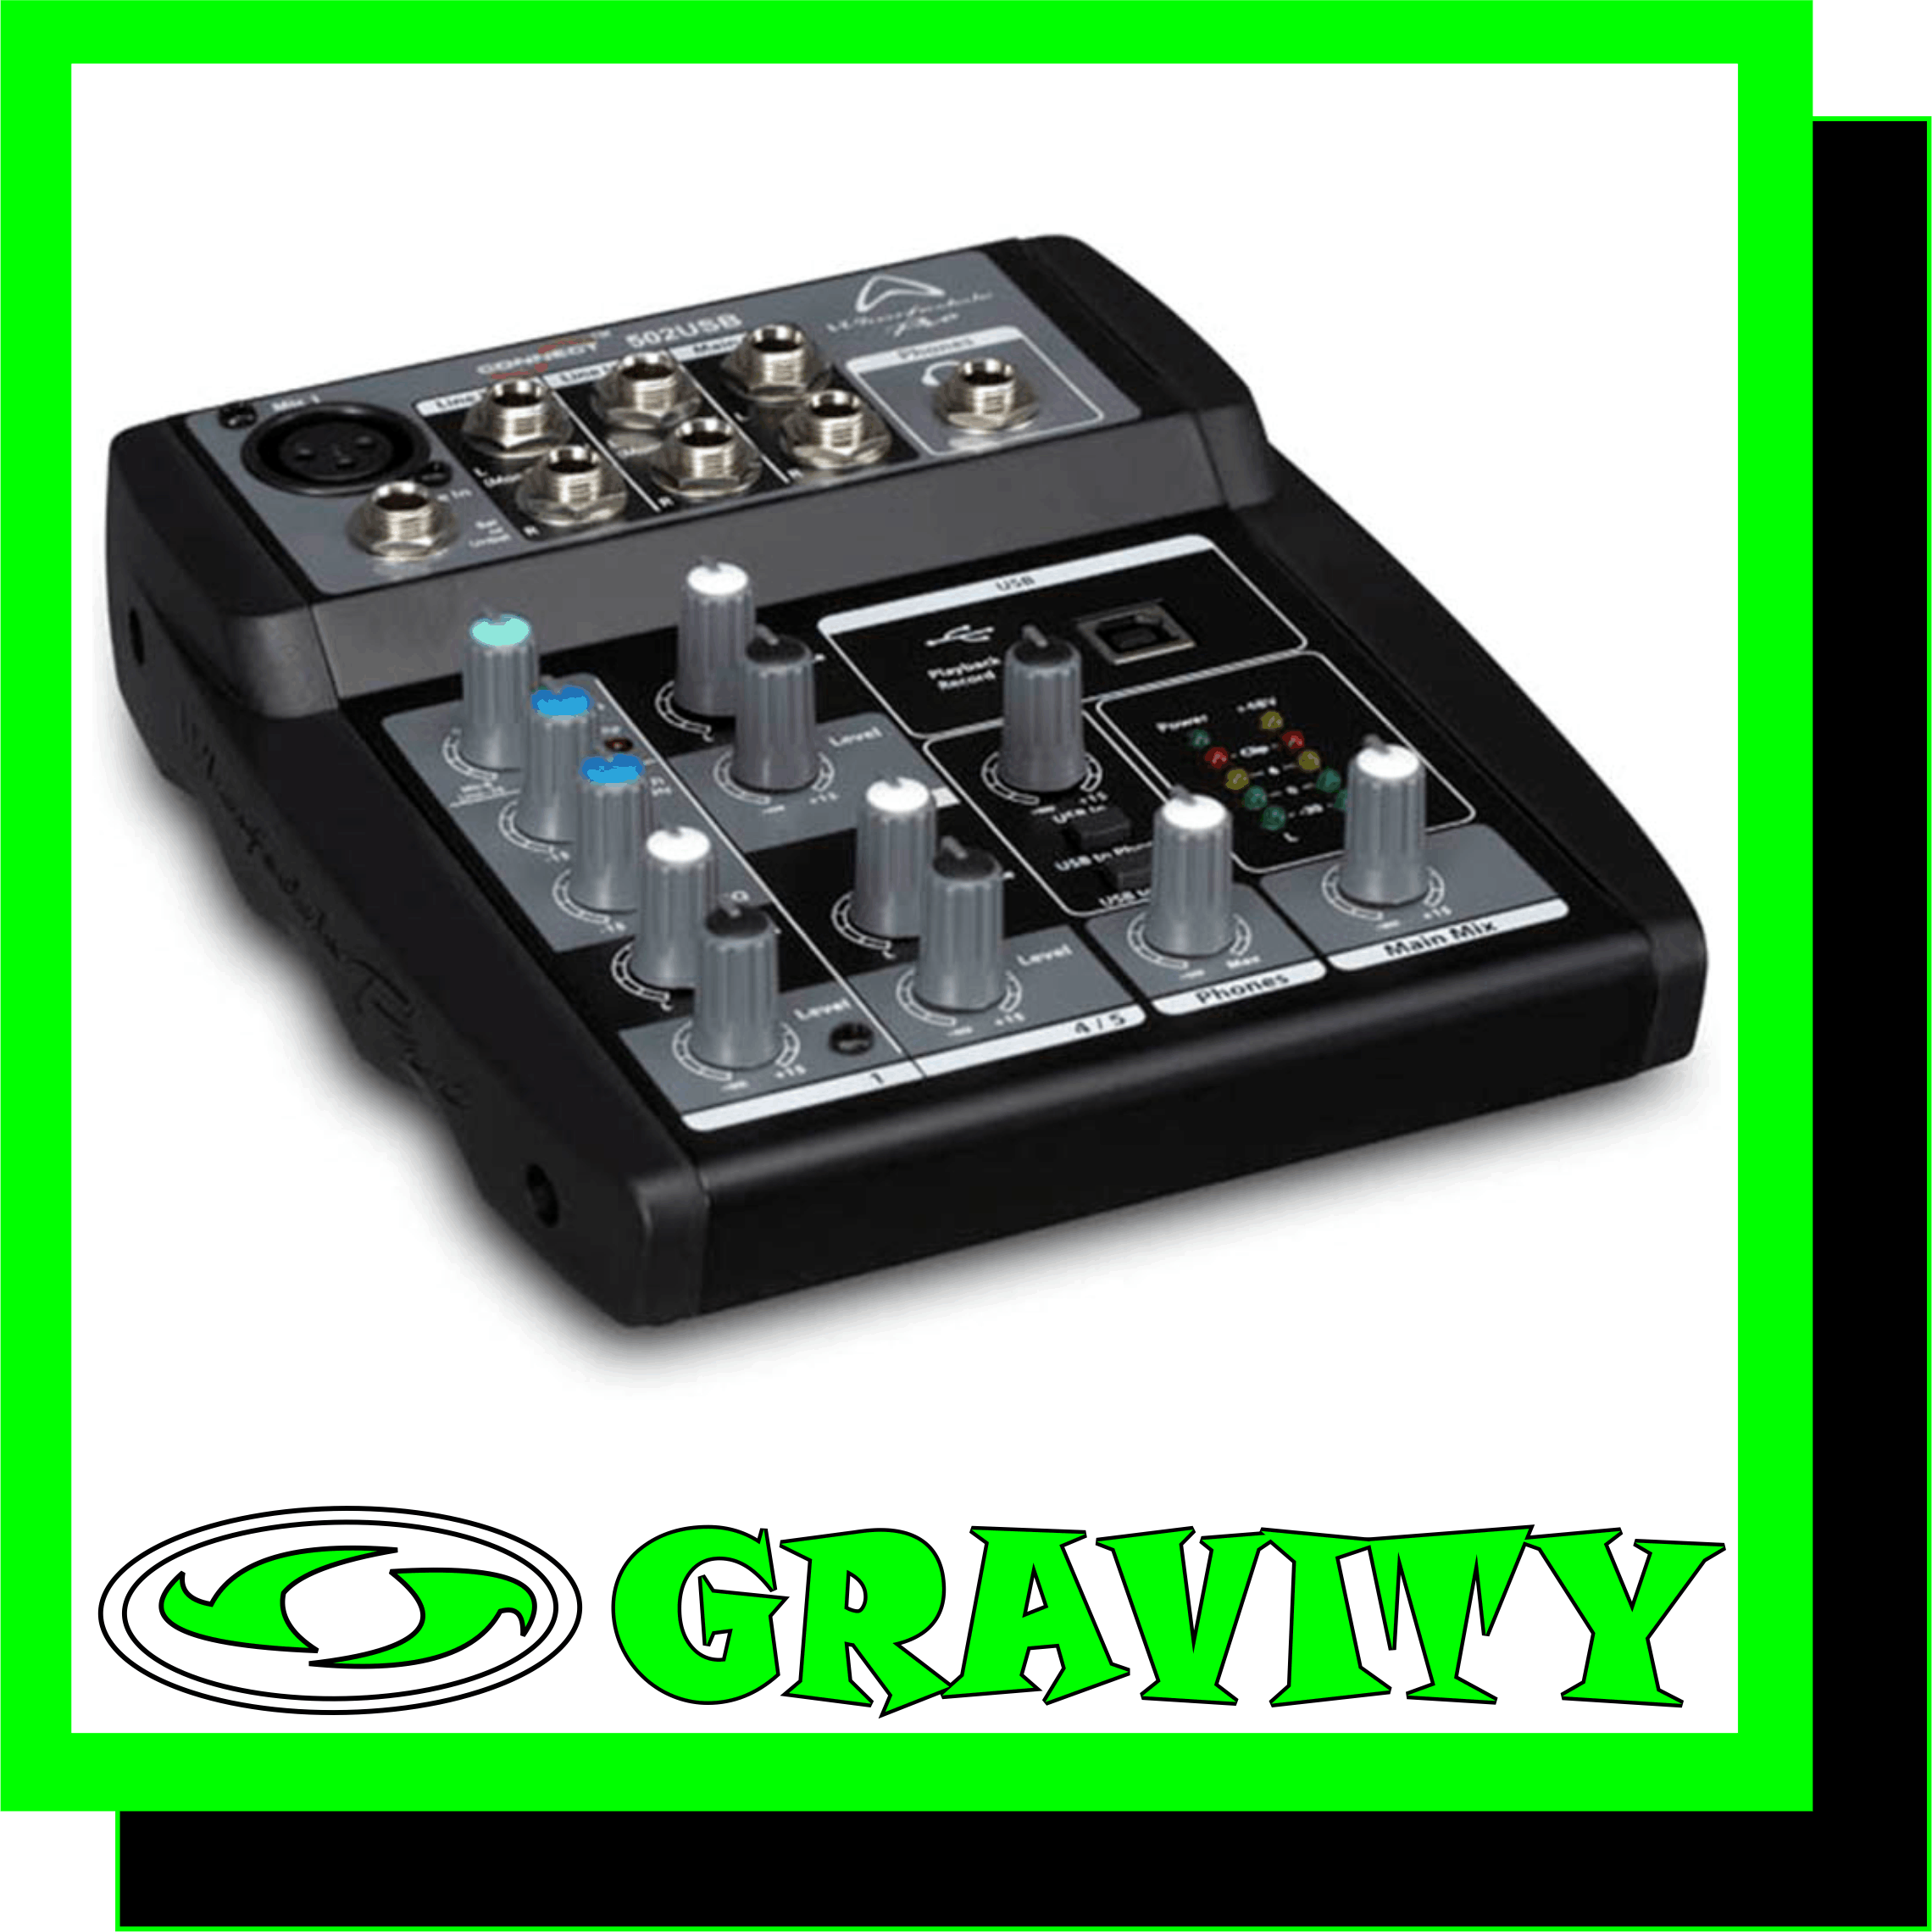 Connect 502USB  Key Features:  -5 Total inputs (1 x XLR / 6.3mm Jack, 2 x twin 6.3mm jack) -2 x 6.3mm jack outputs, headphon -Studio grade phantom power XLR -16 bit / 48kHz built in USB audio interface -Playback and record via USB audio interface -Headphone output -Pan / Balance control -Clip LED display -Ideal for home studio recording and live use -slimline profile for portability and to fit in gig bags  The Wharfedale Pro Connect 502USB is a compact mixing desk with massive capabilities. If you need a portable mixing desk and you do not want to sacrifice space for connections we have managed to condense ample inputs, outputs and other digital features into a slim, small footprint usb mixer which is at home in the studio as it is the road.